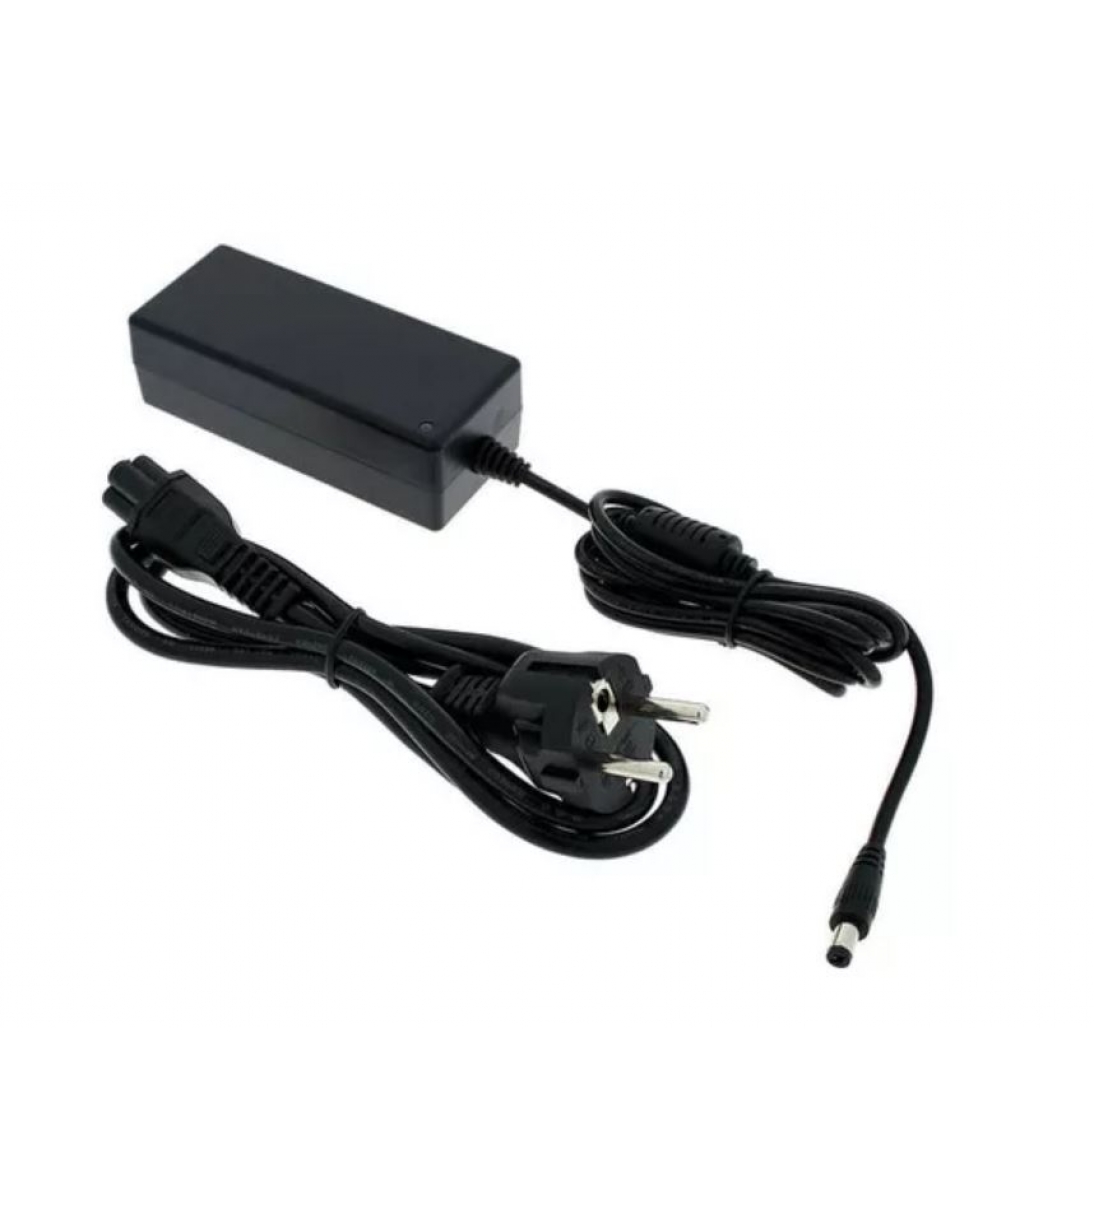 Power Adapter for GE300